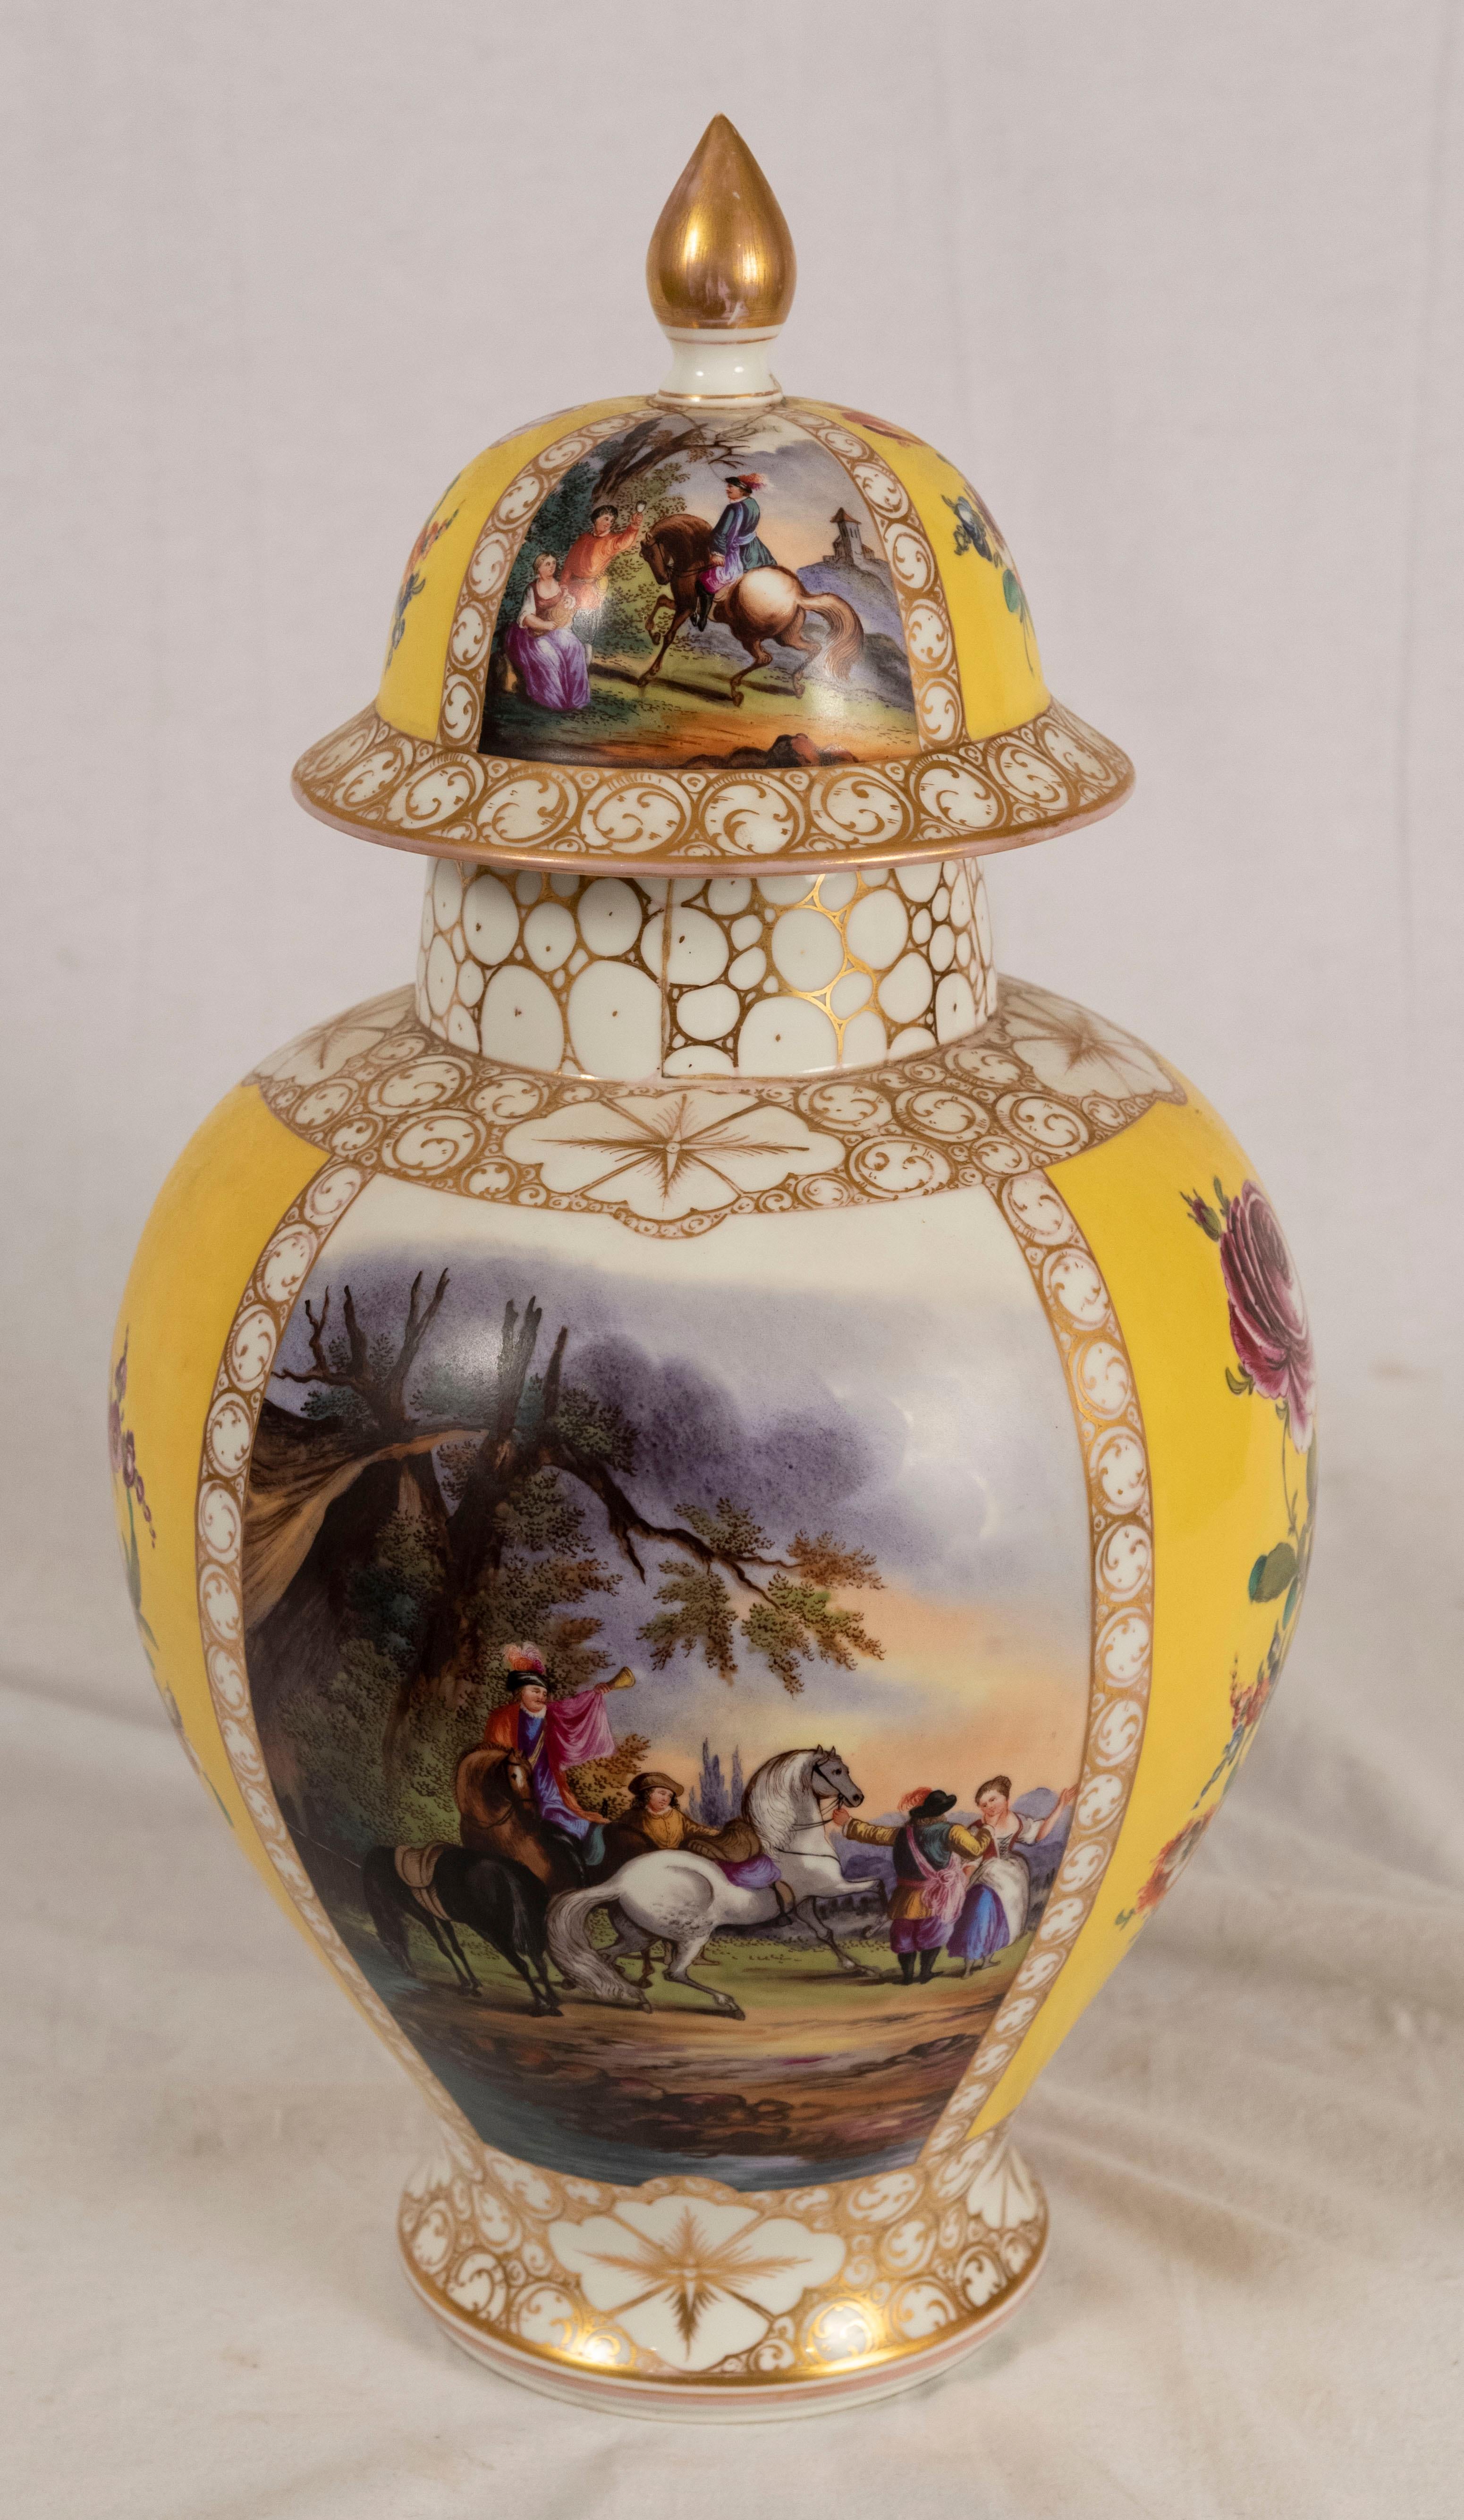 Augustus Rex Meissen porcelain baluster vase with cover and very fine painting of courtly life and floral still life (circa 1870).

Condition: previously cracked and restored.